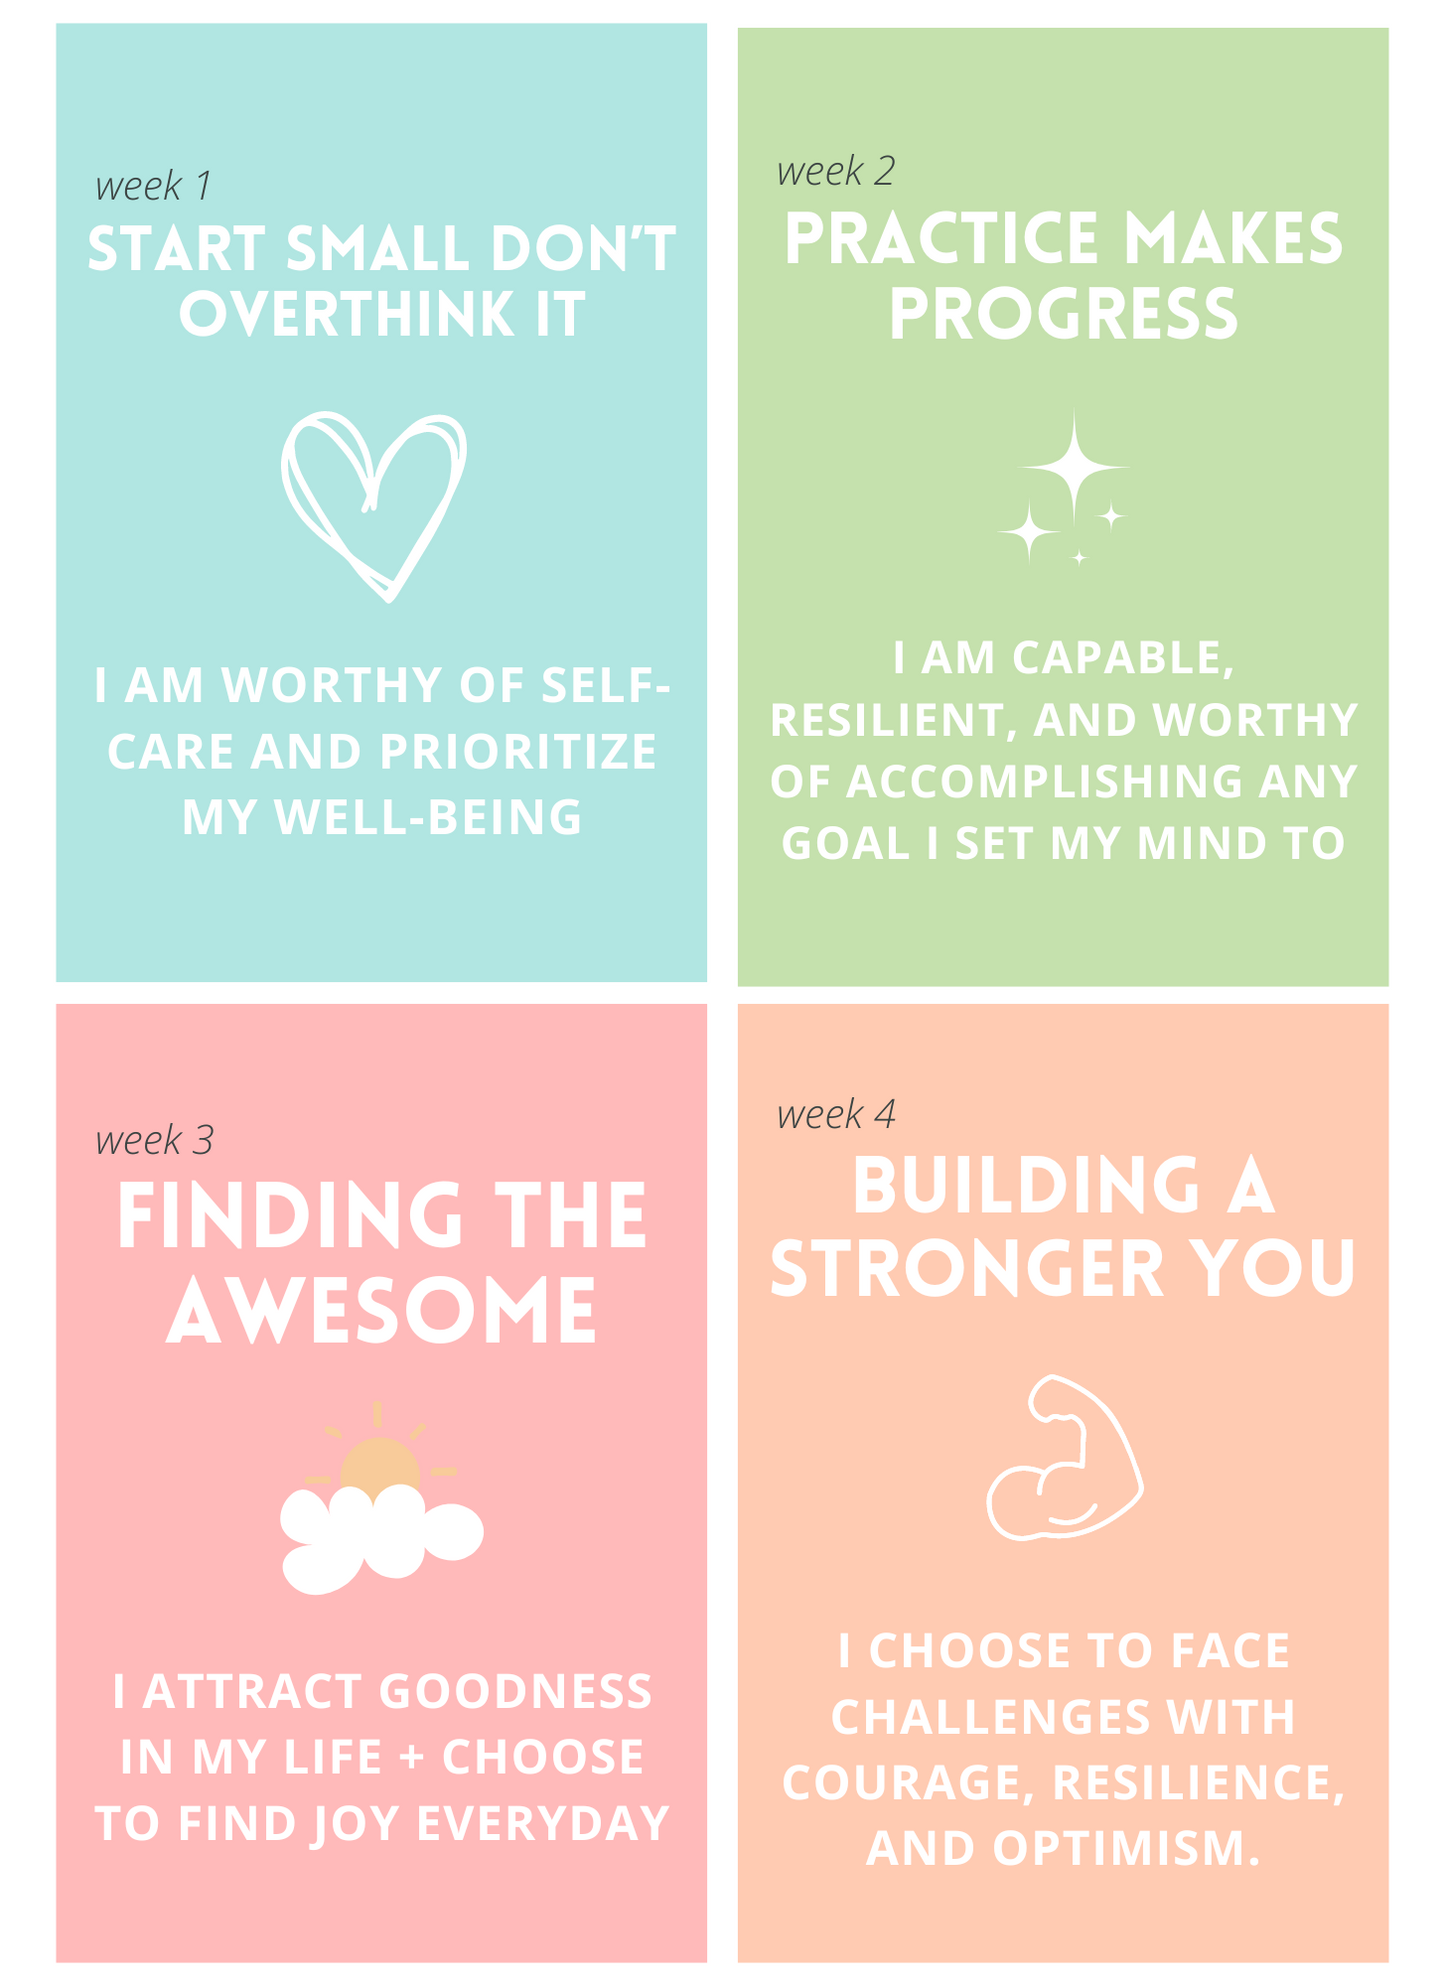 Little Bit of Awesome: 28 Days of Positivity